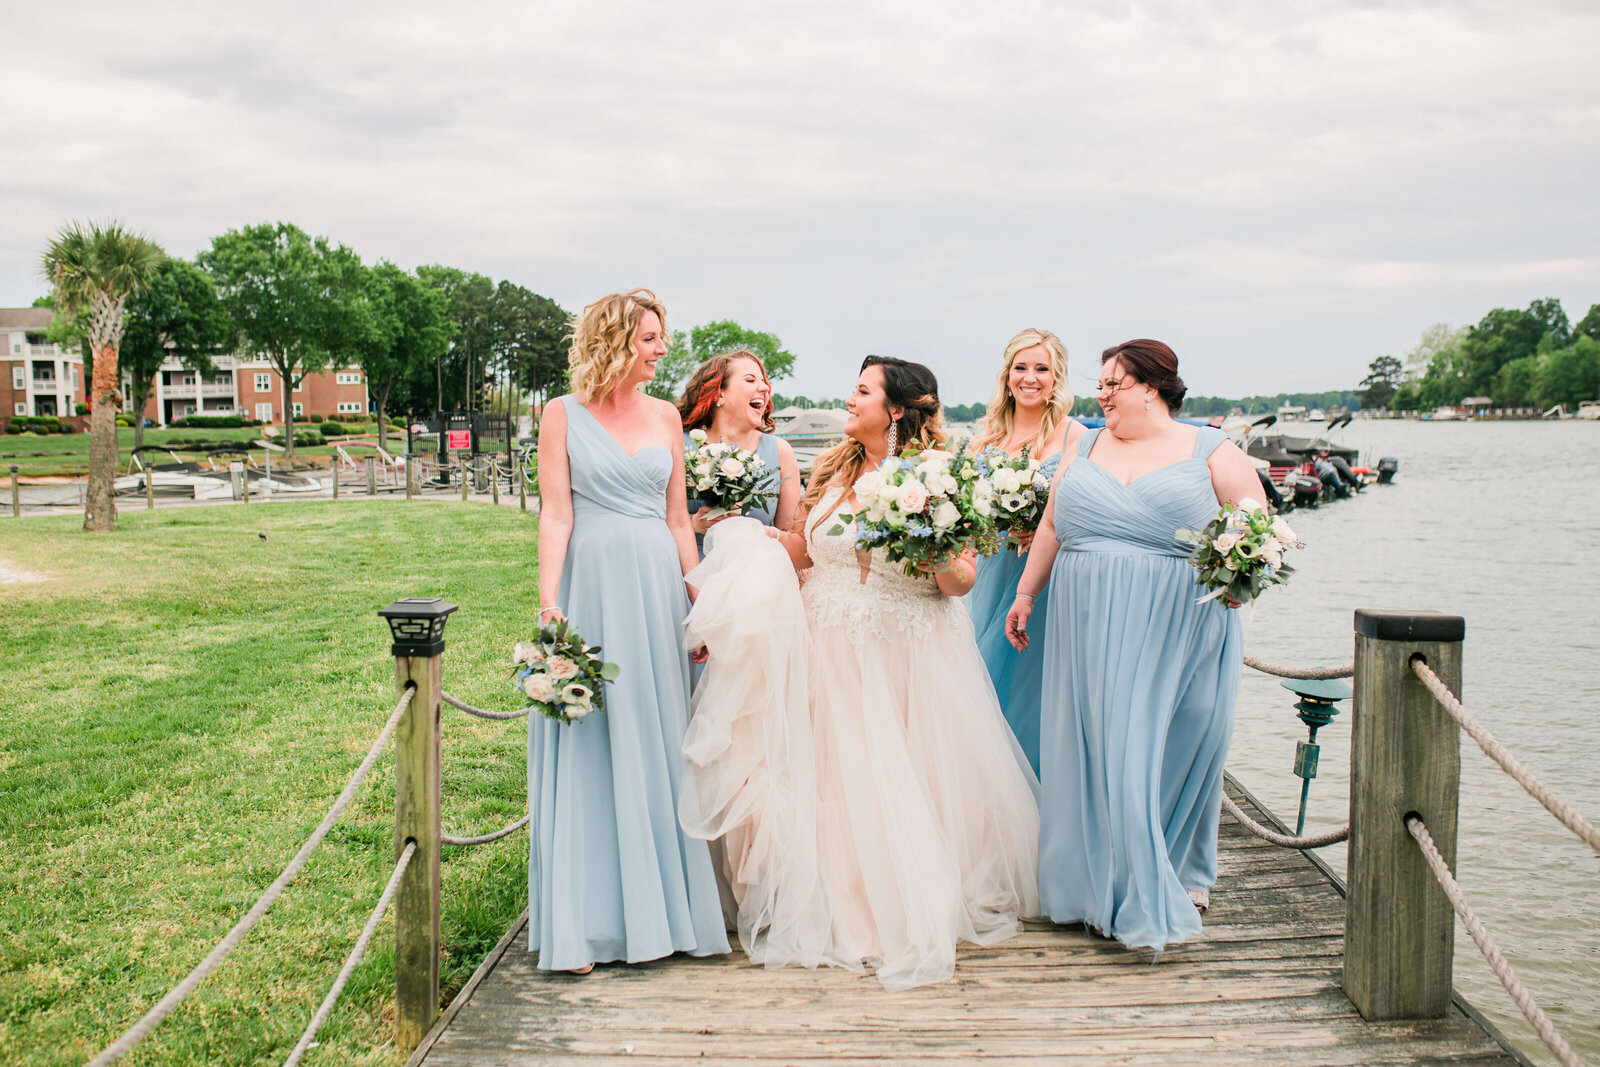 Virginia-Beach-Wedding-Planners-Sincerely-Jane-Events-7468